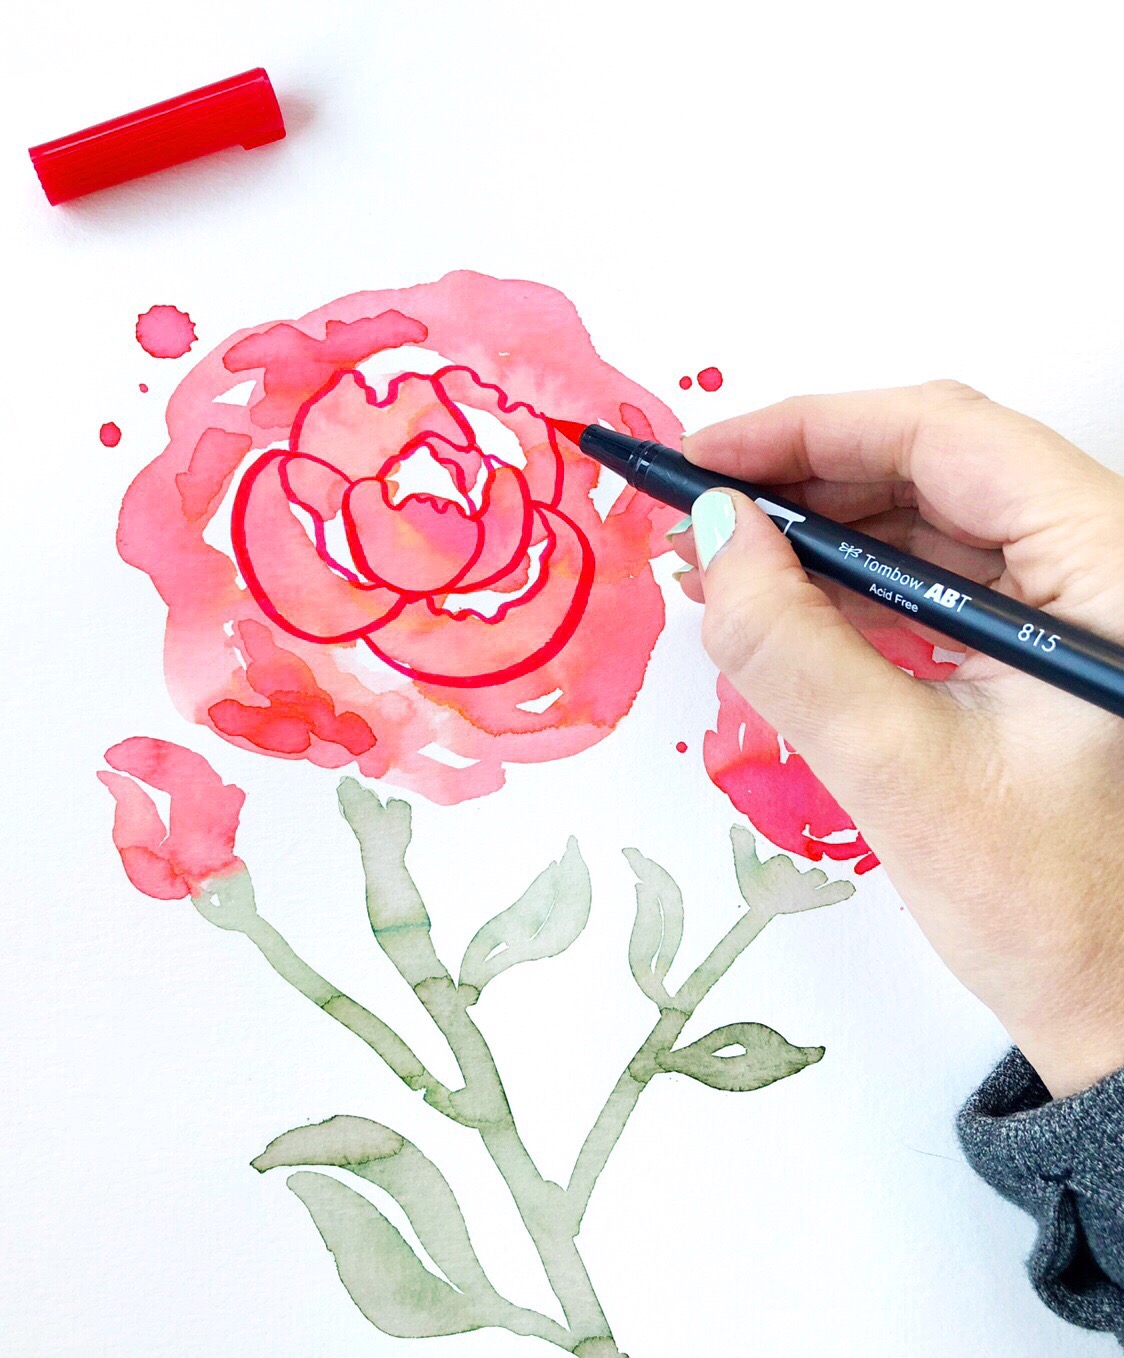 Loose Florals in Living Coral by Jessica Mack on behalf of Tombow